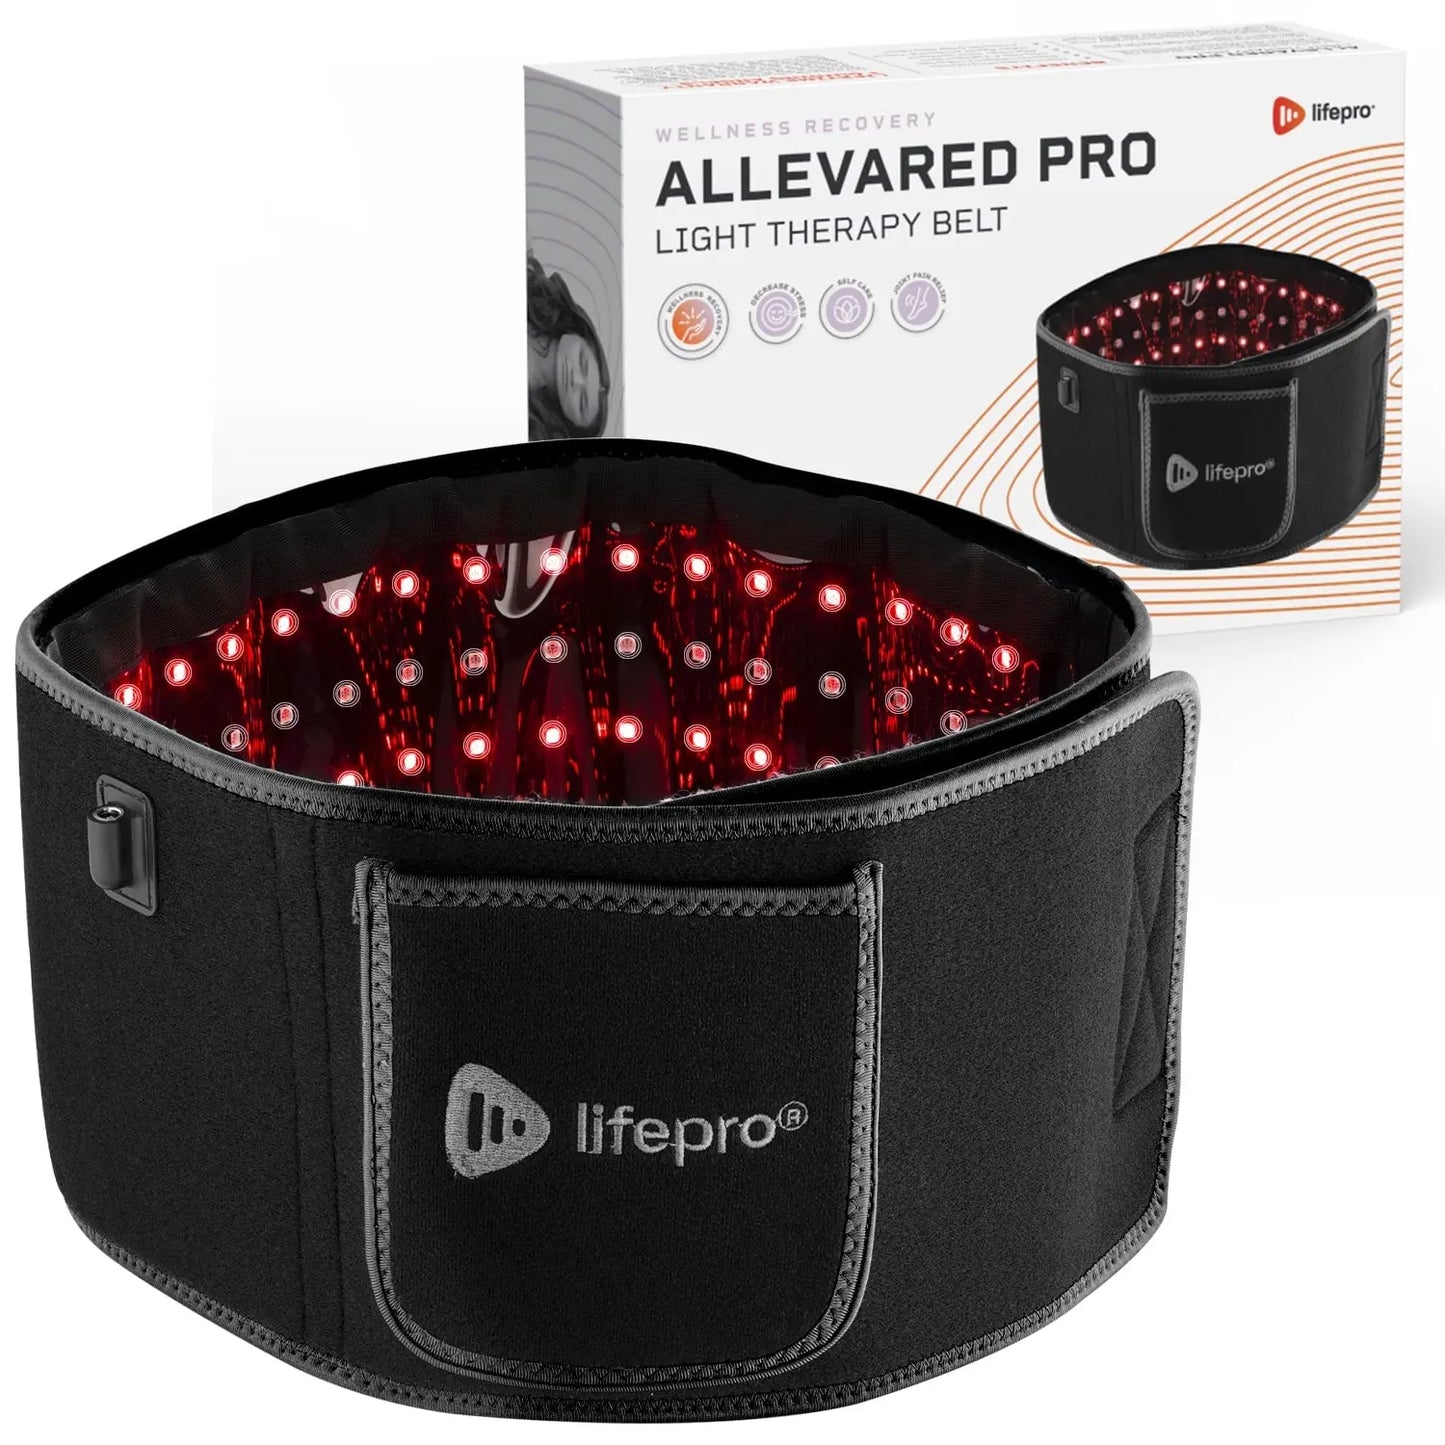 Allevared Pro Light Therapy Belt